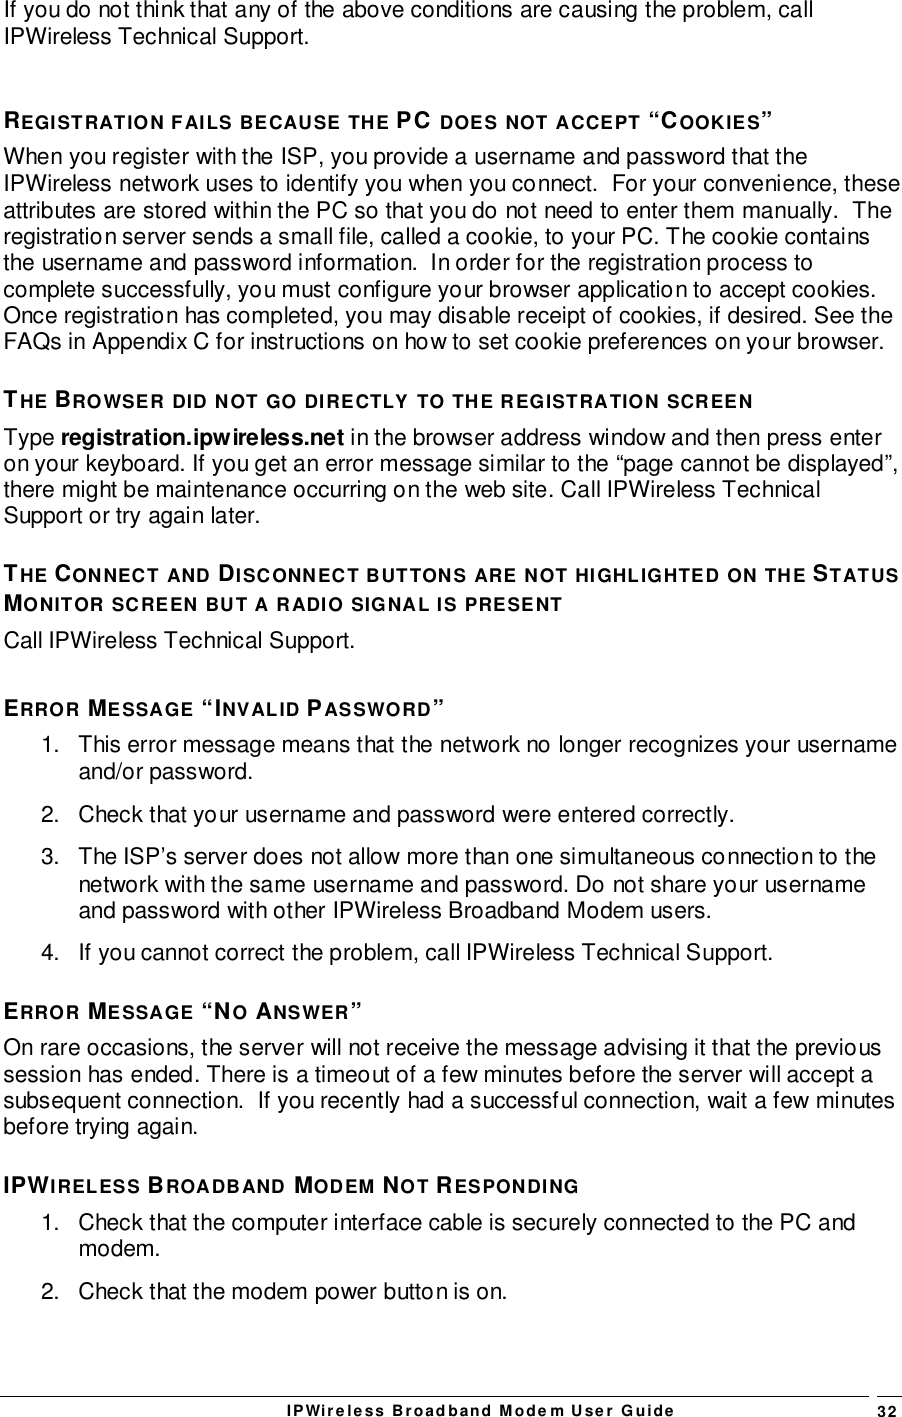 IPWireless Broadband Modem User Guide 32If you do not think that any of the above conditions are causing the problem, callIPWireless Technical Support.REGISTRATION FAILS BECAUSE THE PC DOES NOT ACCEPT “COOKIES”When you register with the ISP, you provide a username and password that theIPWireless network uses to identify you when you connect.  For your convenience, theseattributes are stored within the PC so that you do not need to enter them manually.  Theregistration server sends a small file, called a cookie, to your PC. The cookie containsthe username and password information.  In order for the registration process tocomplete successfully, you must configure your browser application to accept cookies.Once registration has completed, you may disable receipt of cookies, if desired. See theFAQs in Appendix C for instructions on how to set cookie preferences on your browser.THE BROWSER DID NOT GO DIRECTLY TO THE REGISTRATION SCREENType registration.ipwireless.net in the browser address window and then press enteron your keyboard. If you get an error message similar to the “page cannot be displayed”,there might be maintenance occurring on the web site. Call IPWireless TechnicalSupport or try again later.THE CONNECT AND DISCONNECT BUTTONS ARE NOT HIGHLIGHTED ON THE STATUSMONITOR SCREEN BUT A RADIO SIGNAL IS PRESENTCall IPWireless Technical Support.ERROR MESSAGE “INVALID PASSWORD”1.  This error message means that the network no longer recognizes your usernameand/or password.2.  Check that your username and password were entered correctly.3.  The ISP’s server does not allow more than one simultaneous connection to thenetwork with the same username and password. Do not share your usernameand password with other IPWireless Broadband Modem users.4.  If you cannot correct the problem, call IPWireless Technical Support.ERROR MESSAGE “NO ANSWER”On rare occasions, the server will not receive the message advising it that the previoussession has ended. There is a timeout of a few minutes before the server will accept asubsequent connection.  If you recently had a successful connection, wait a few minutesbefore trying again.IPWIRELESS BROADBAND MODEM NOT RESPONDING1.  Check that the computer interface cable is securely connected to the PC andmodem.2.  Check that the modem power button is on.